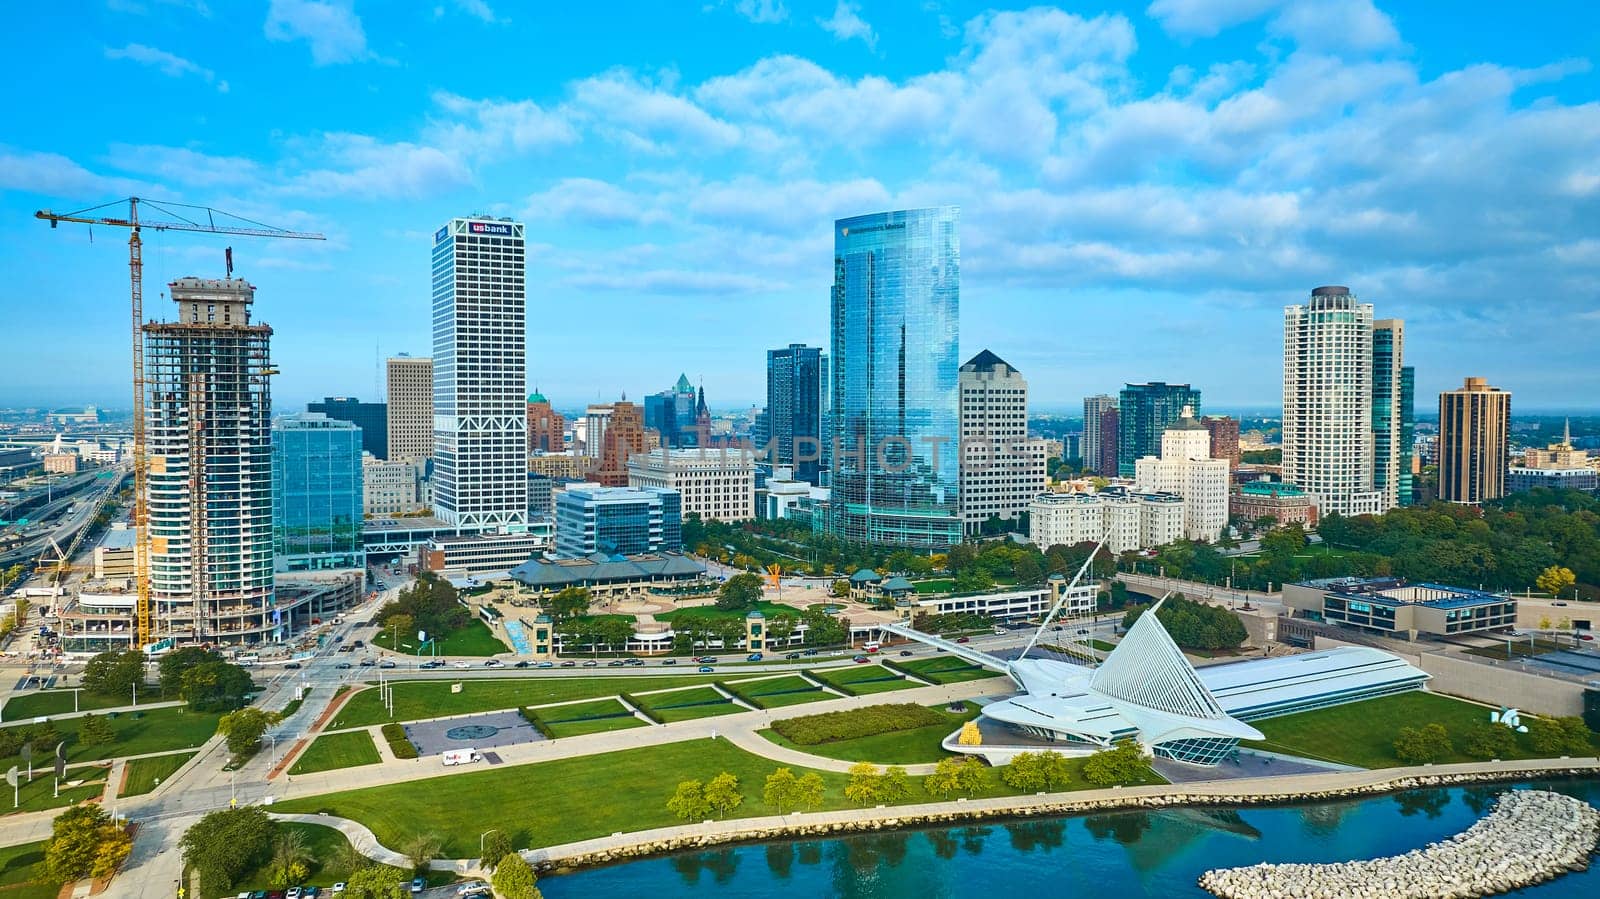 2023 Aerial View of Milwaukee Skyline, showcasing a blend of shiny skyscrapers, ongoing construction, and the iconic Quadracci Pavilion nestled in a green park, all captured by a DJI Mavic 3 drone.